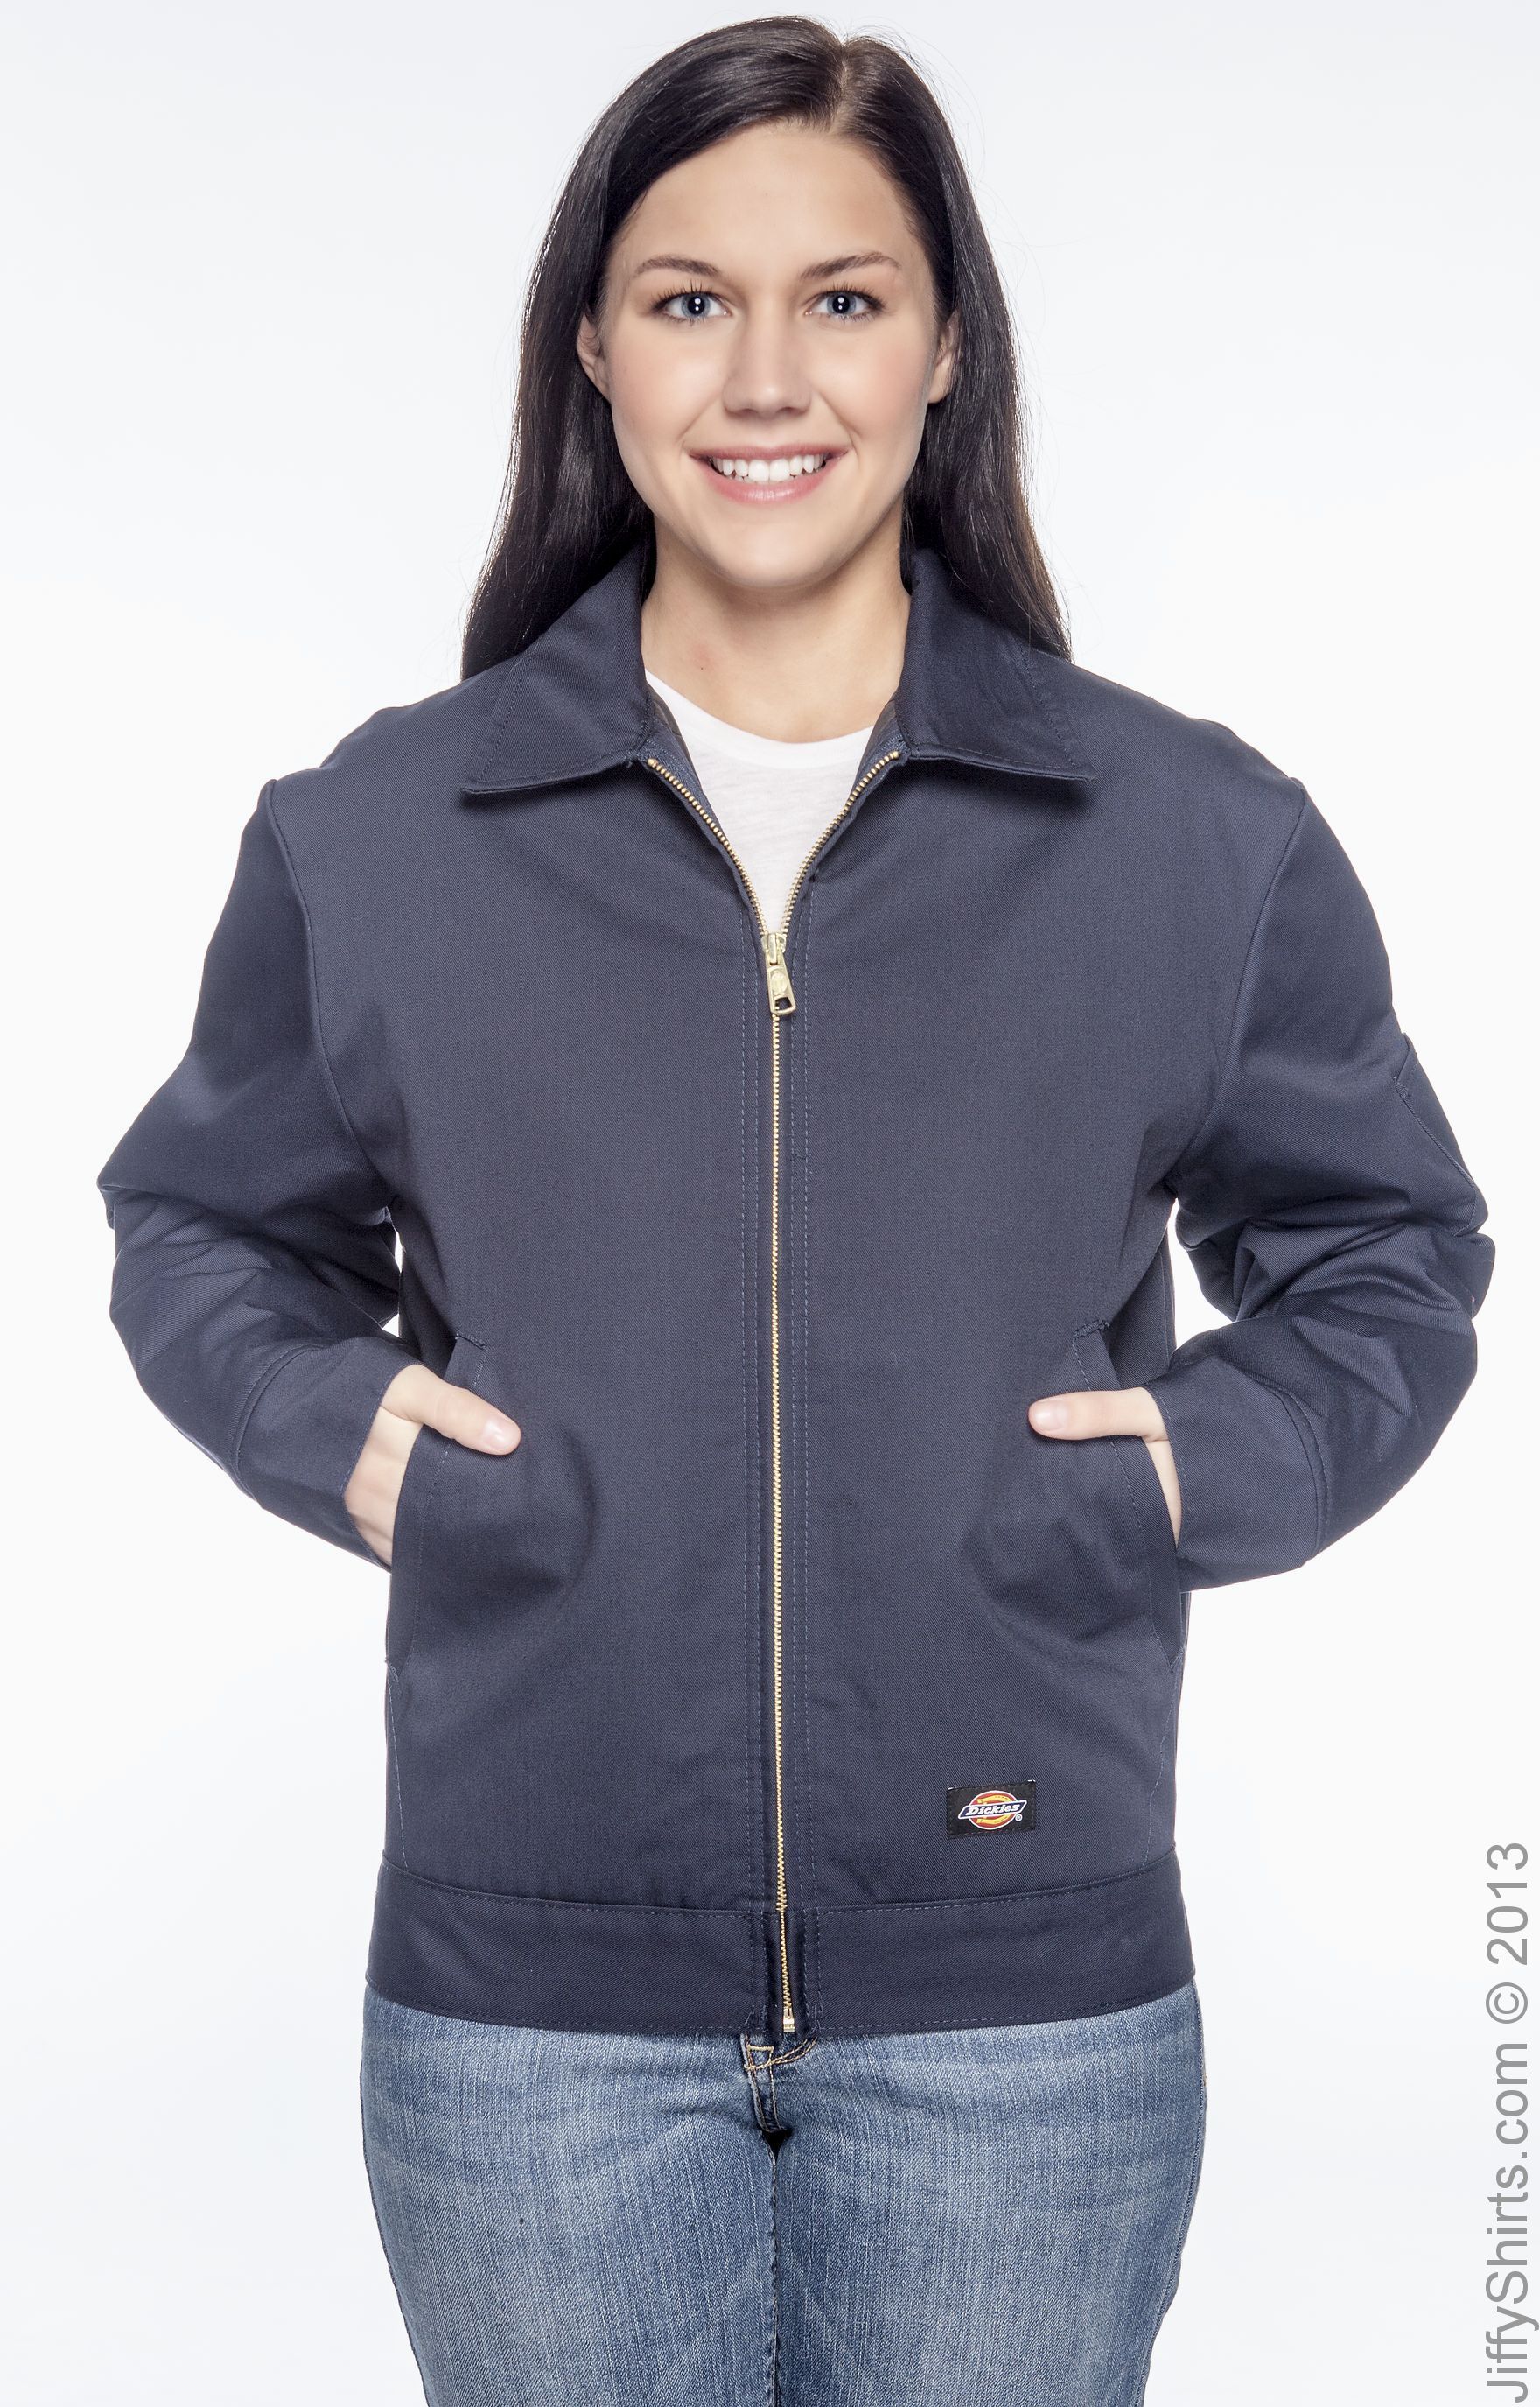 Polyester Jackets In Navy | Fast & Free Shipping At $59 | Jiffy